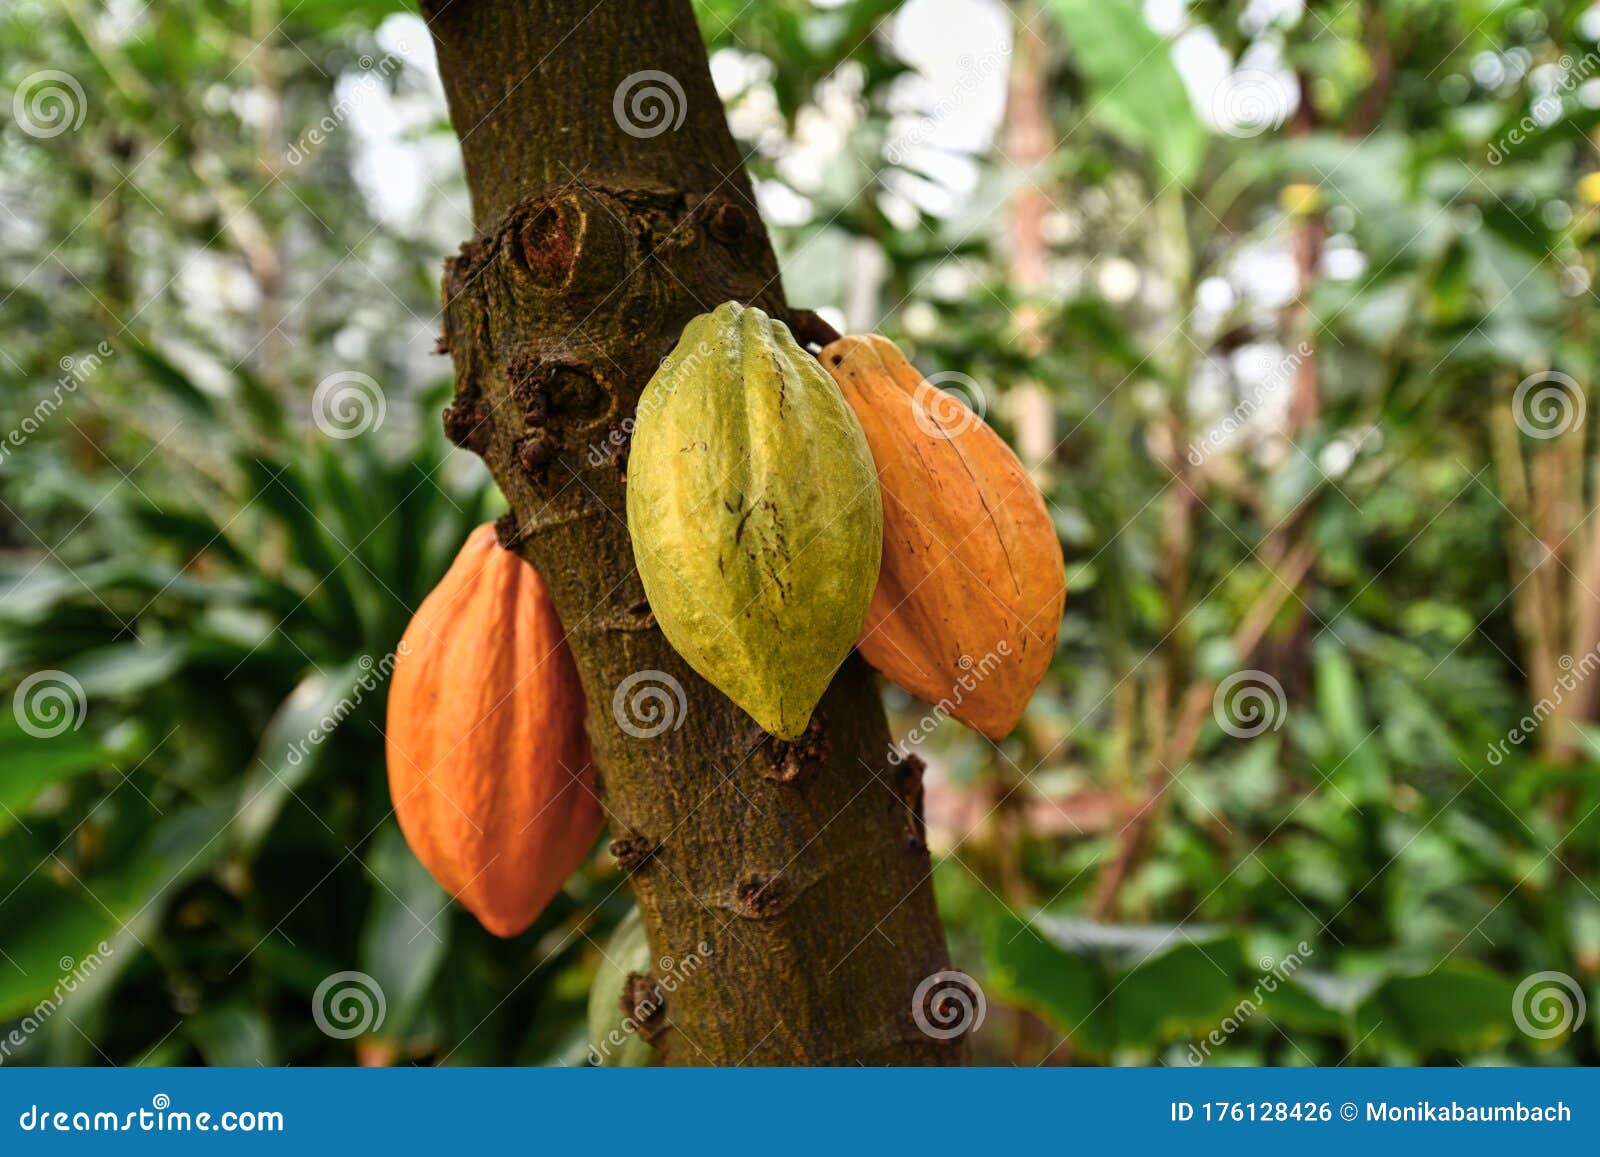 theobroma cacao` cocoa plant tree with huge yellow and green cocoa